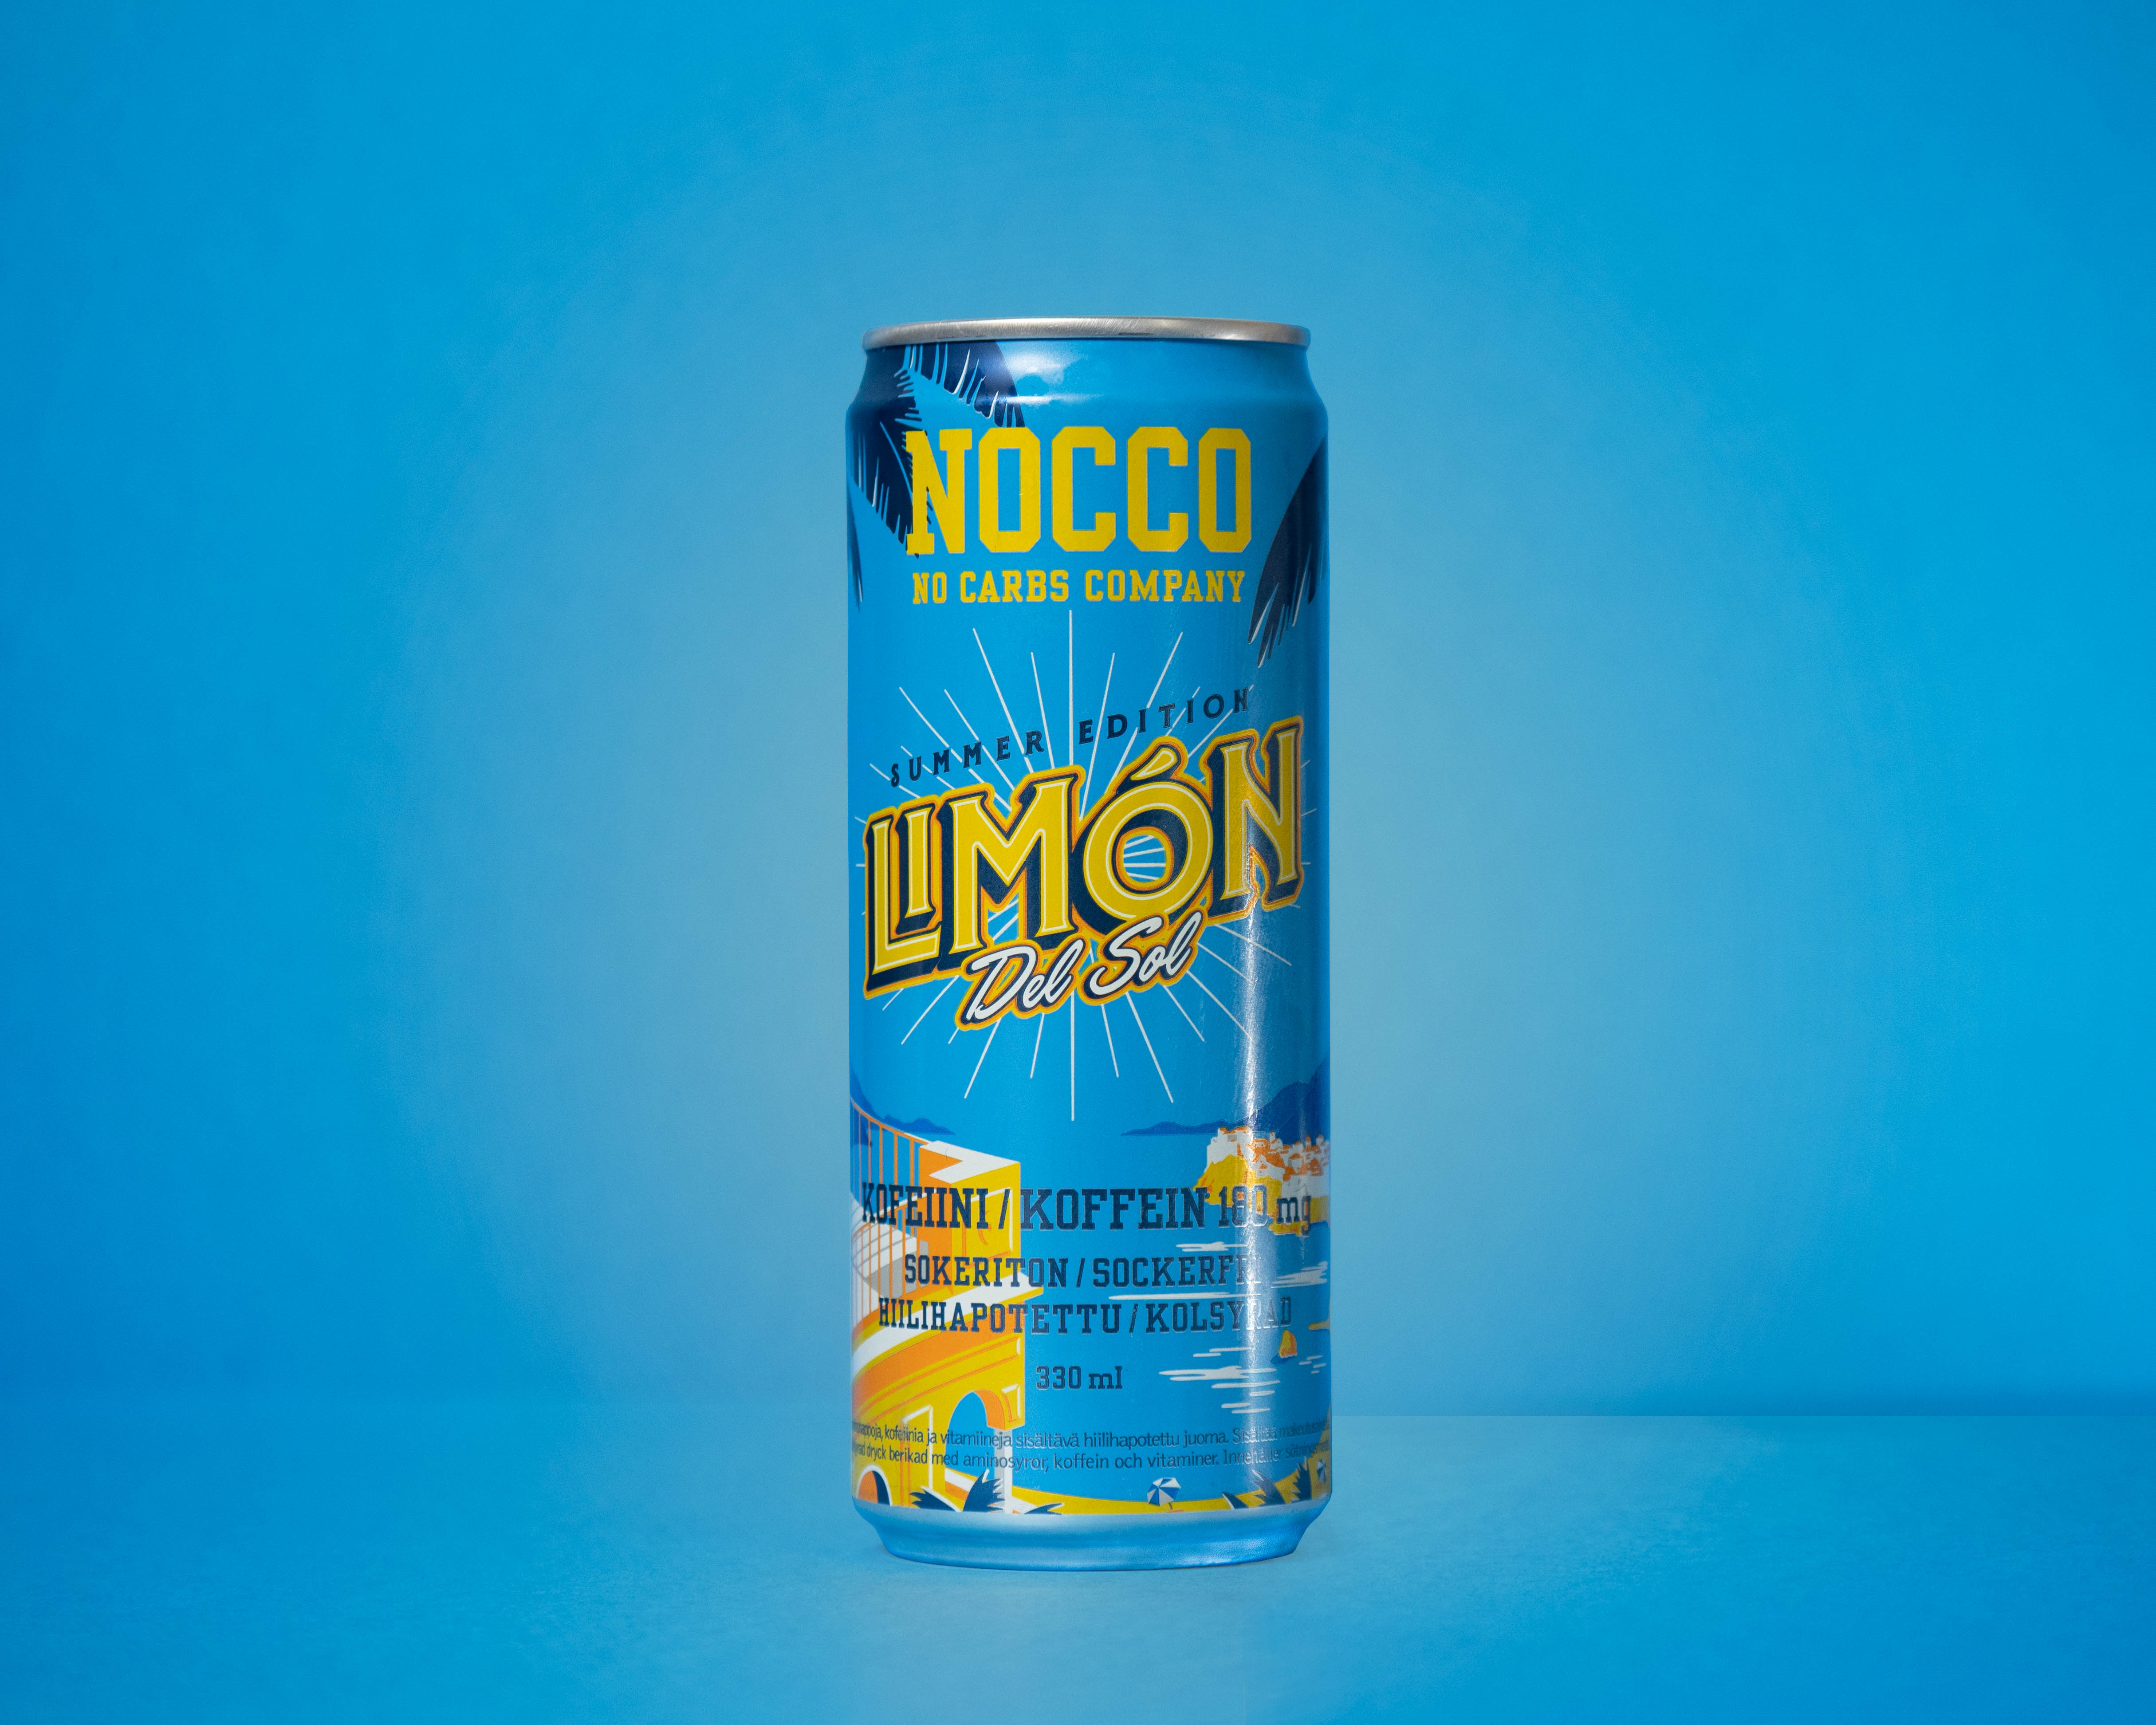 Nocco Summer edition can